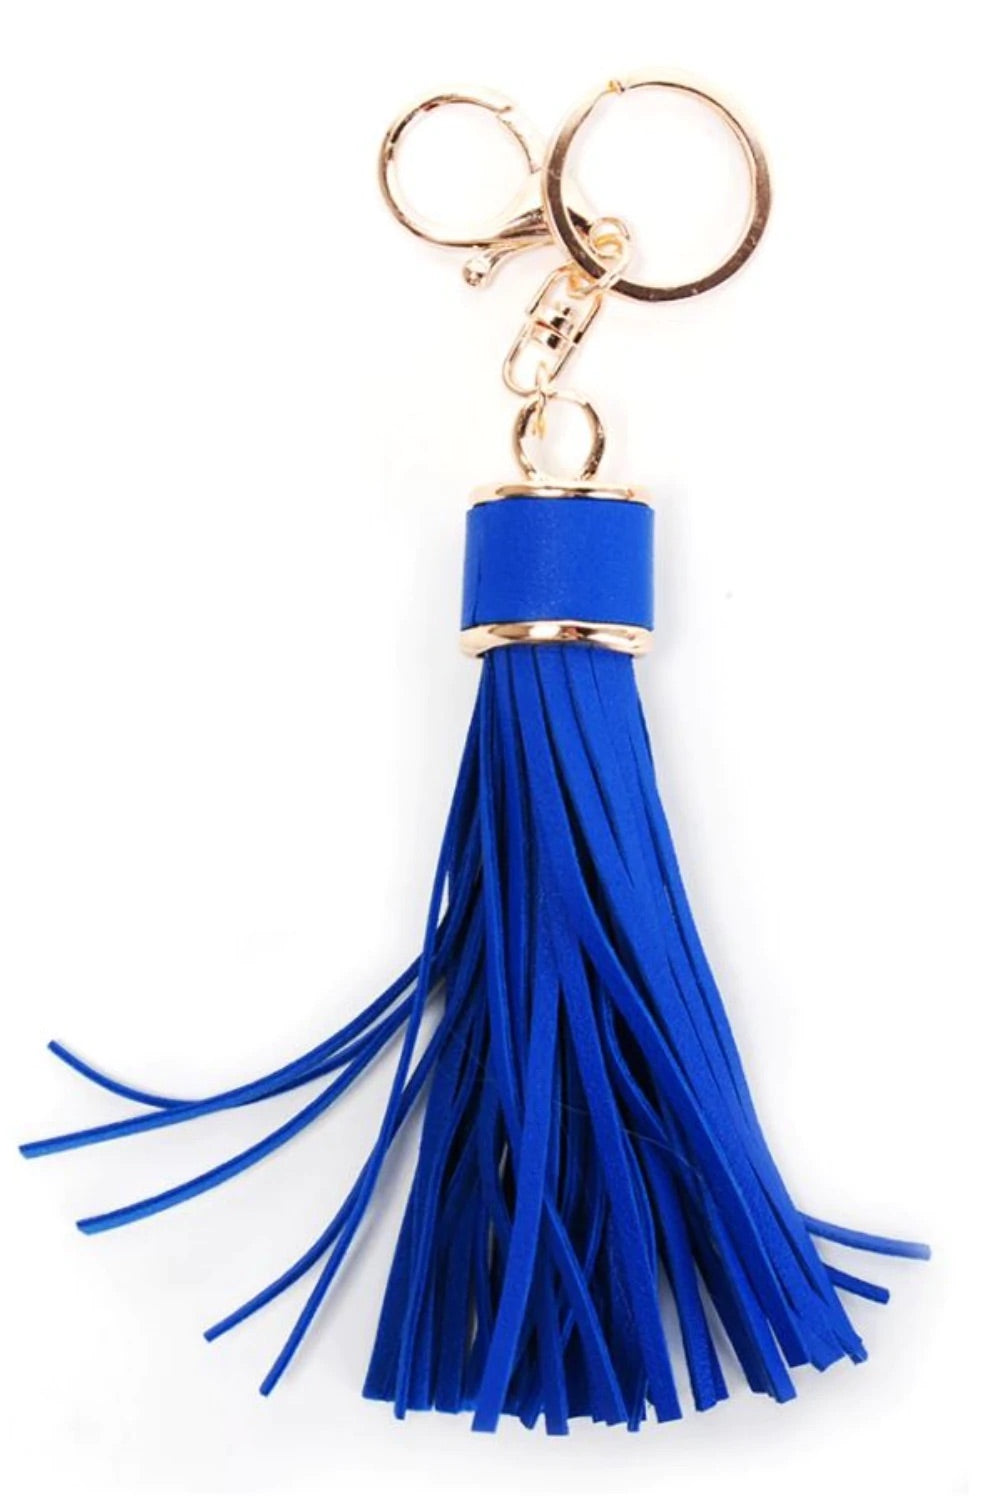 Blue leather tassle with gold details